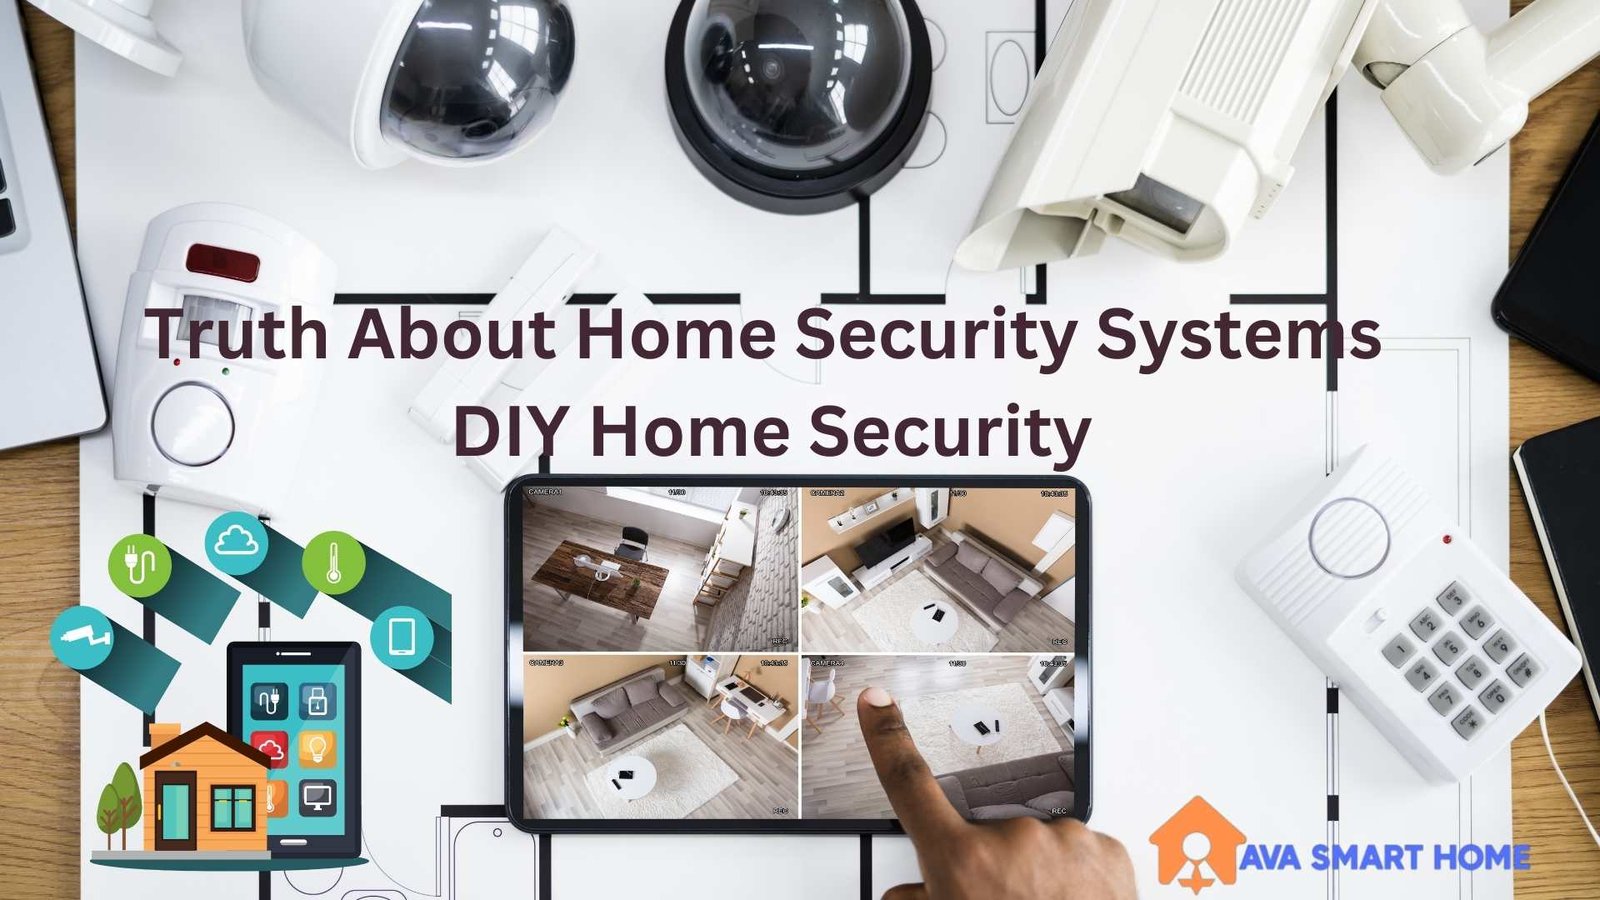 The Truth About Home Security Systems: DIY Home Security